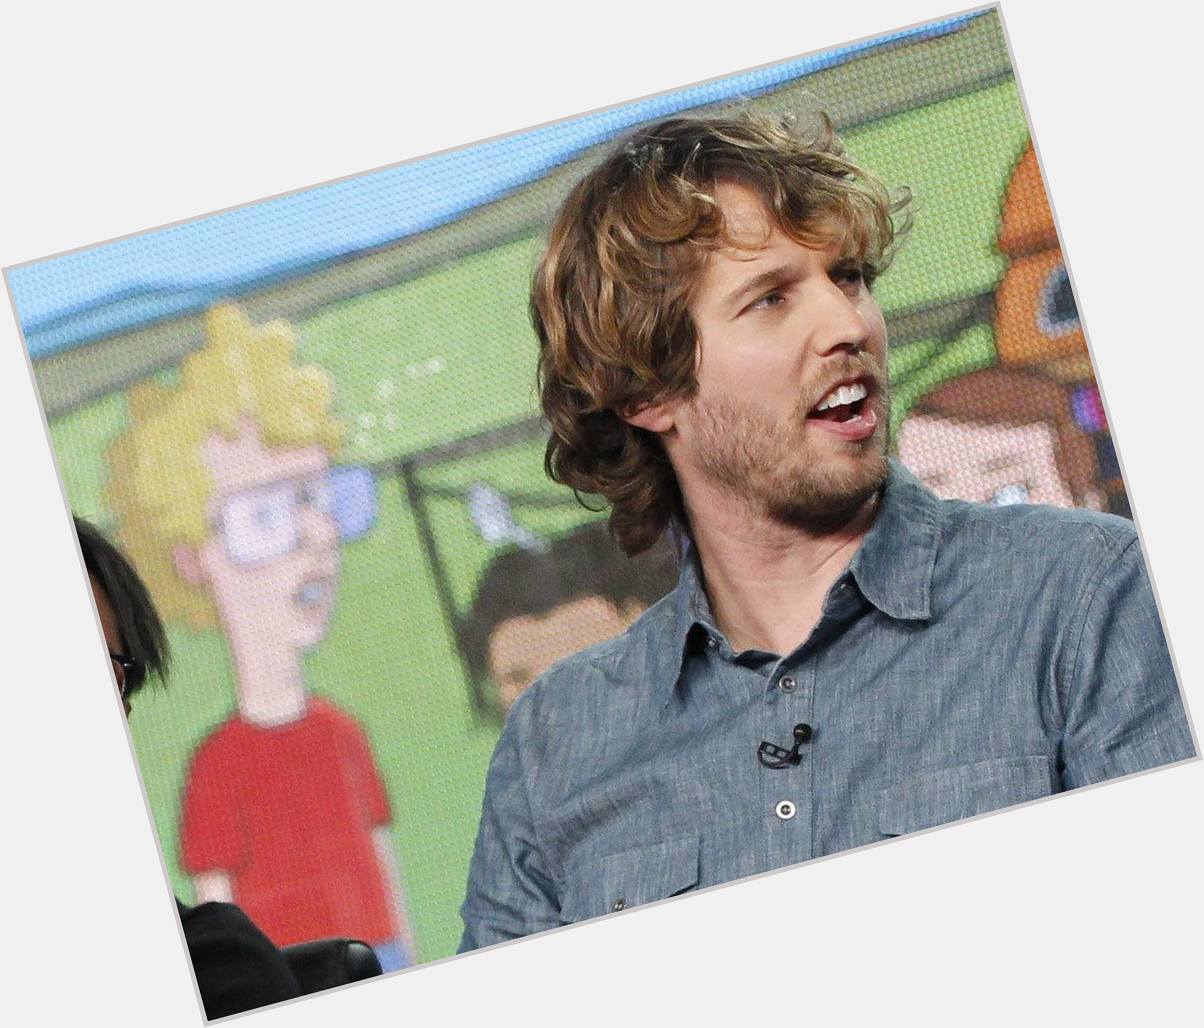 A Happy Birthday Shout-Out to Producer and Actor Jon Heder!

 